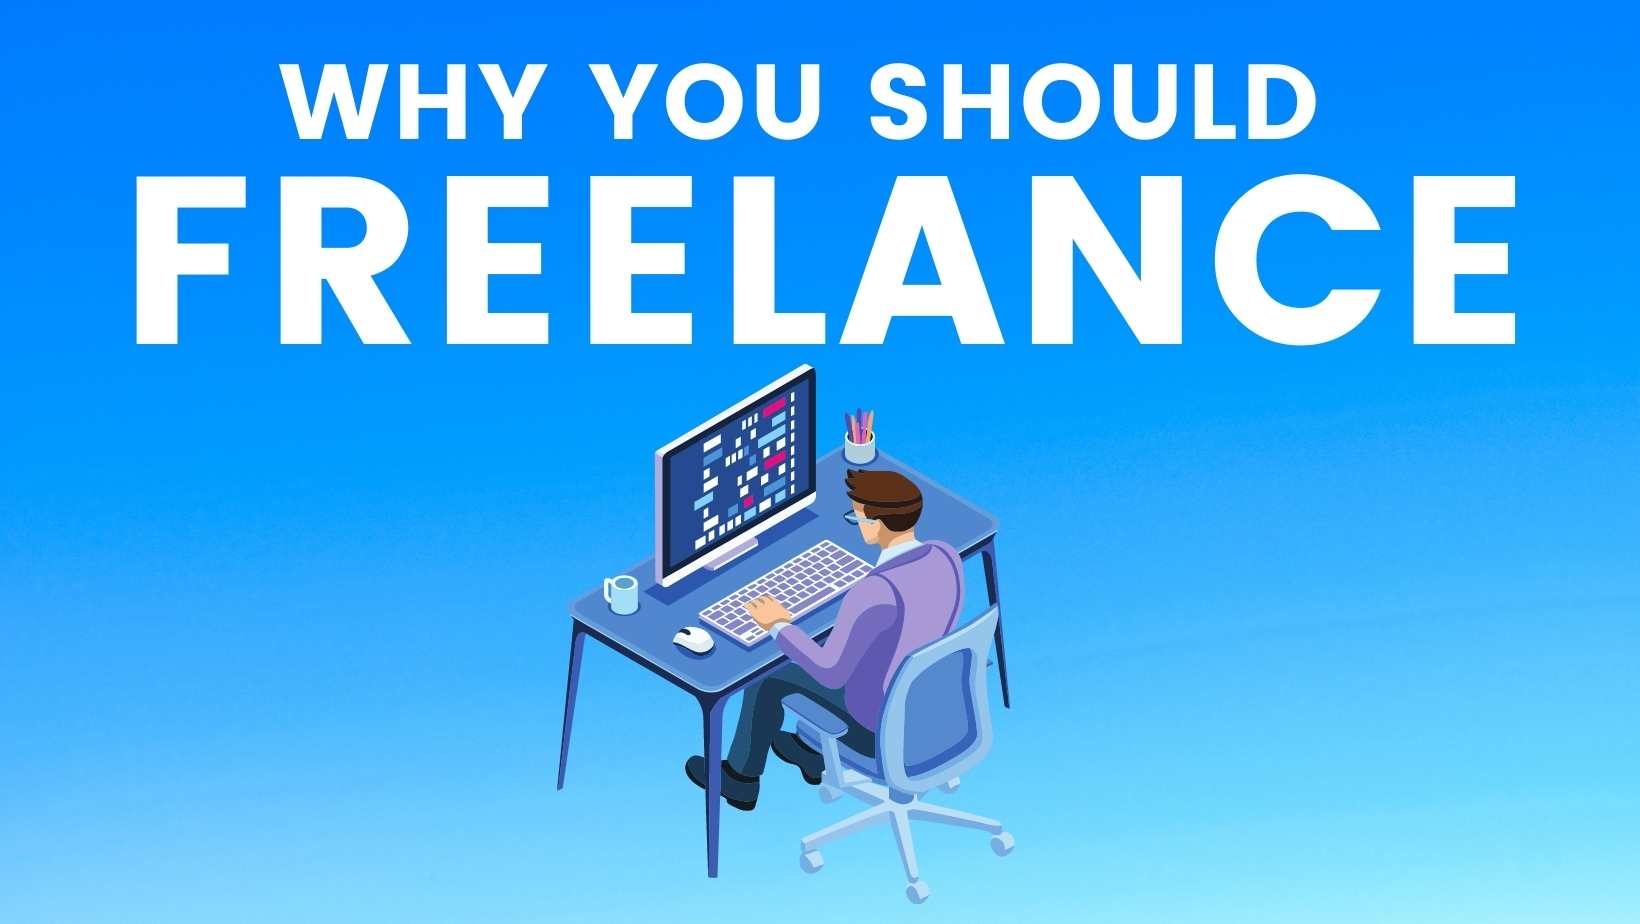 Why you should freelance?